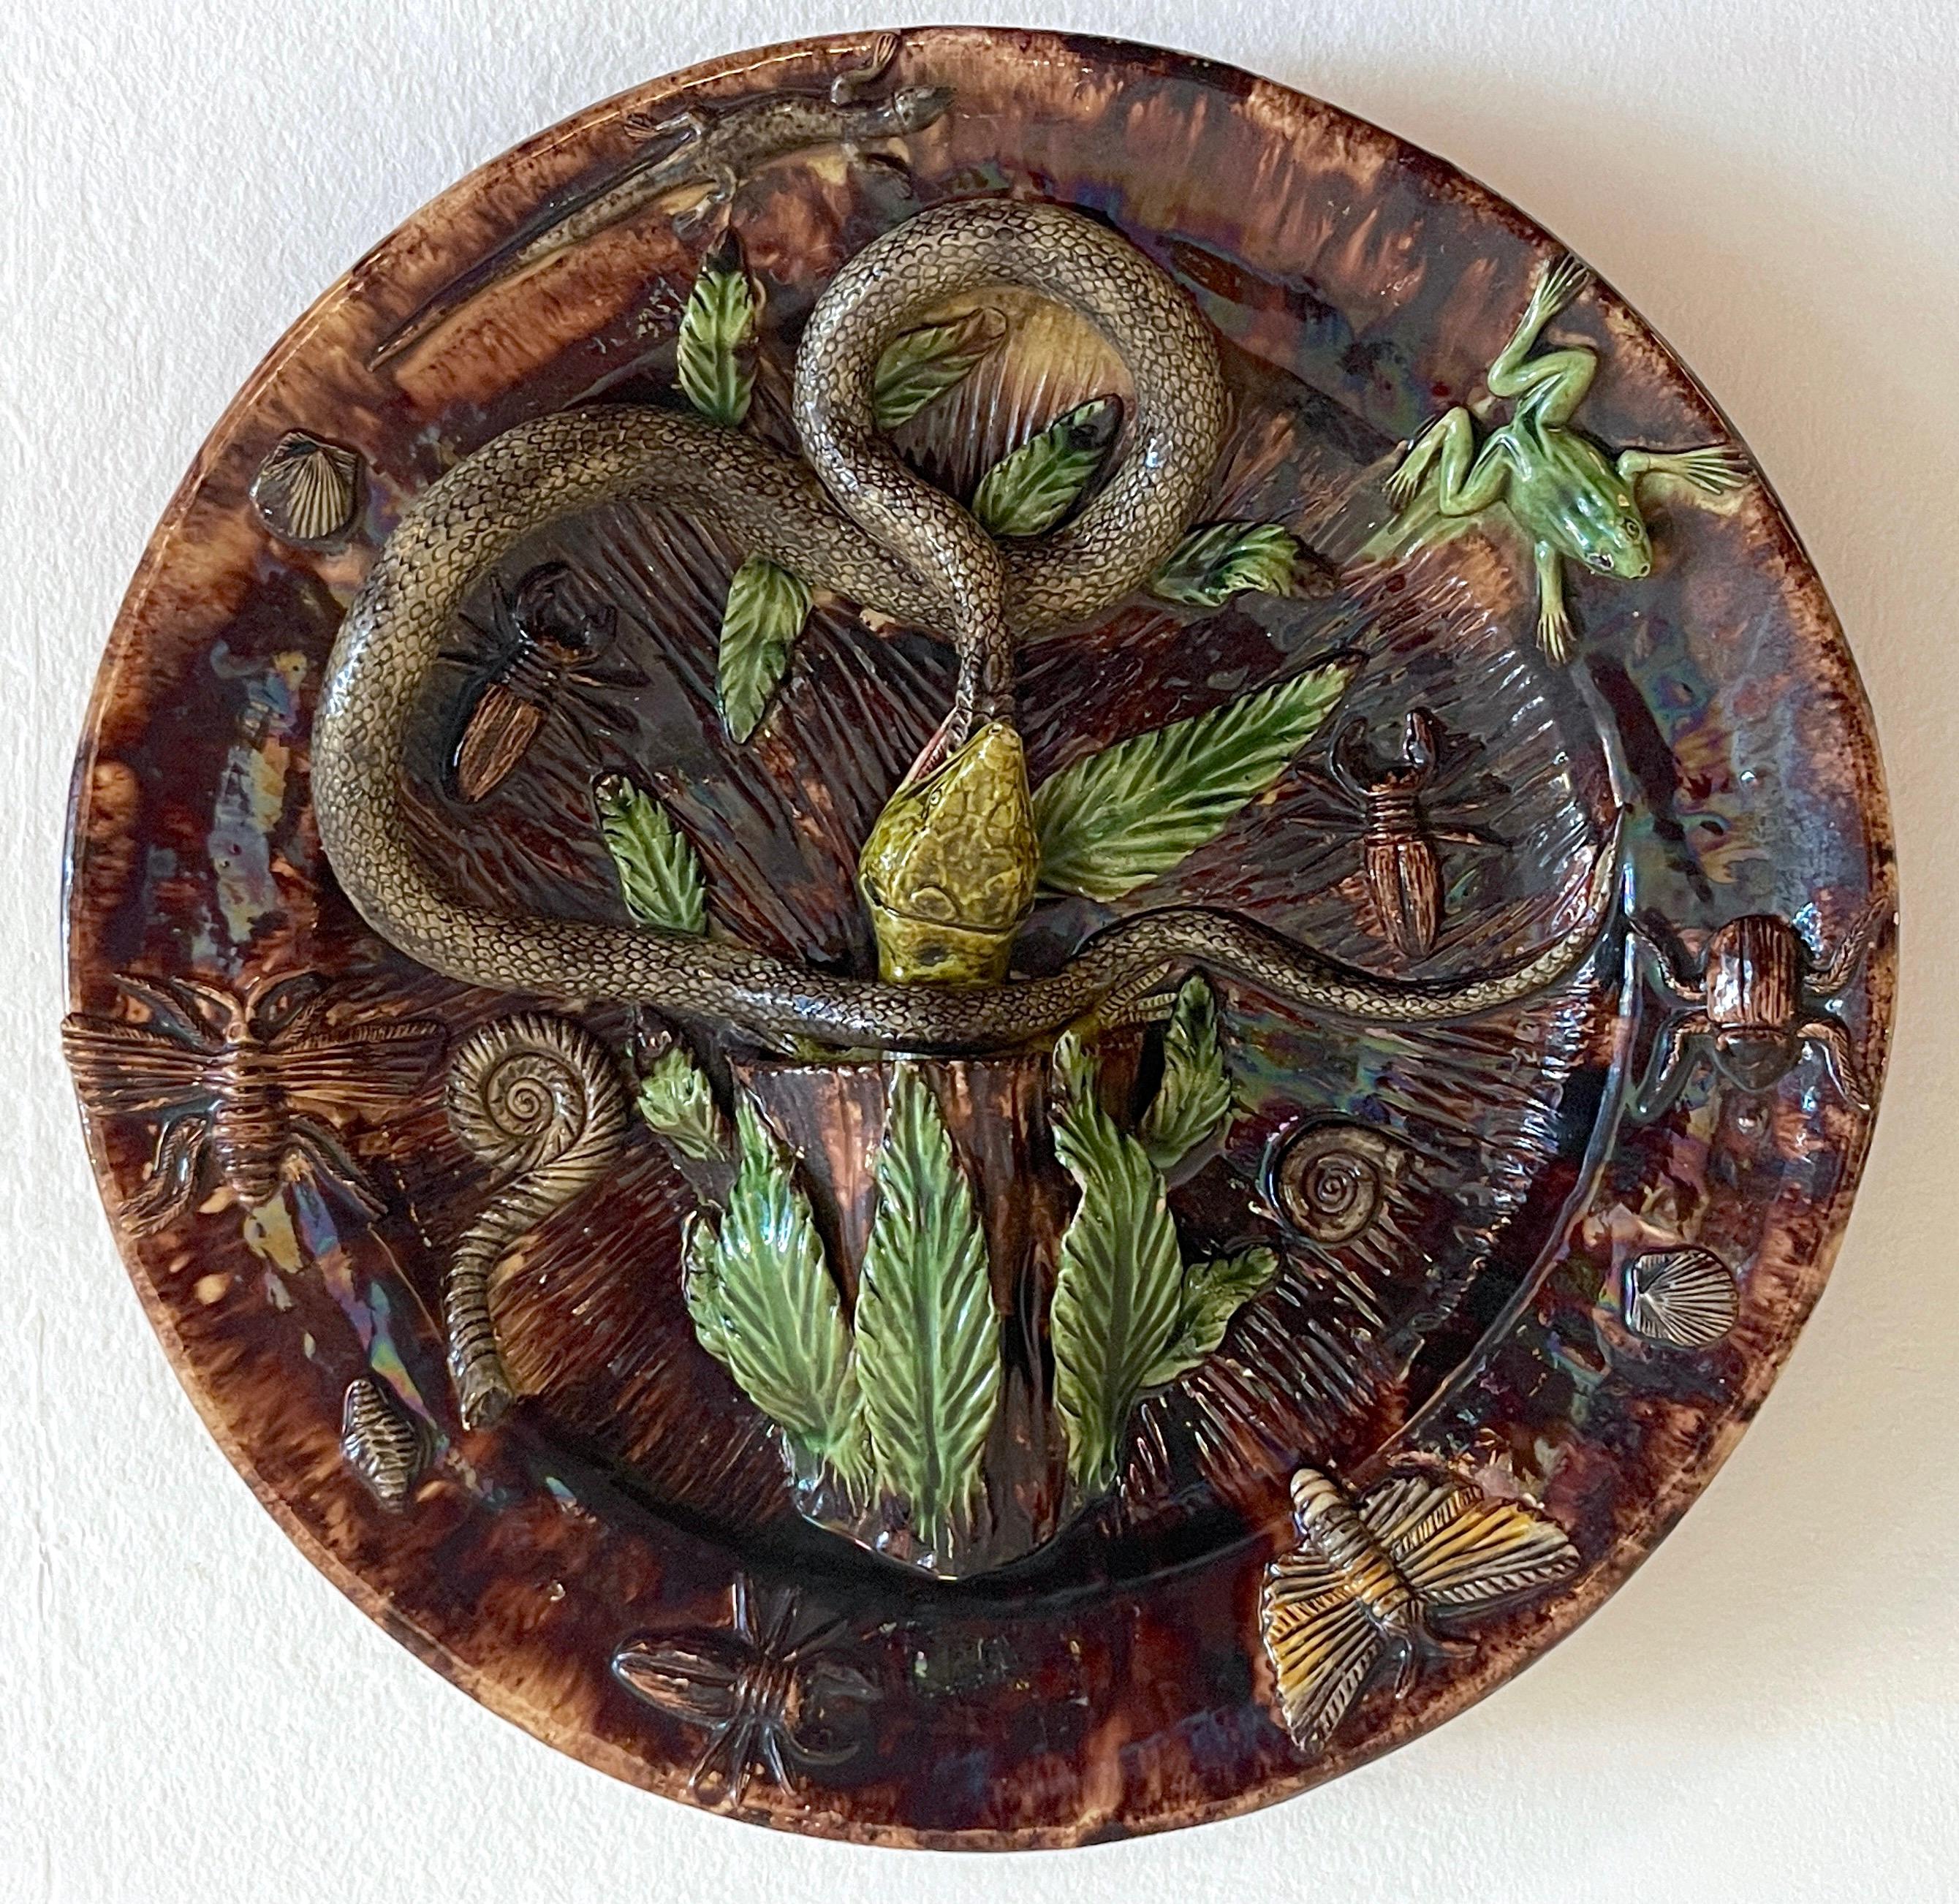 19th Century Palissy Majolica snake & lizard charger
A extraordinary large example, The center with a lizard grasping the serpents head in a naturalistic background, modeled in realistic three-dimensional glazed pottery, the perimeter applied with